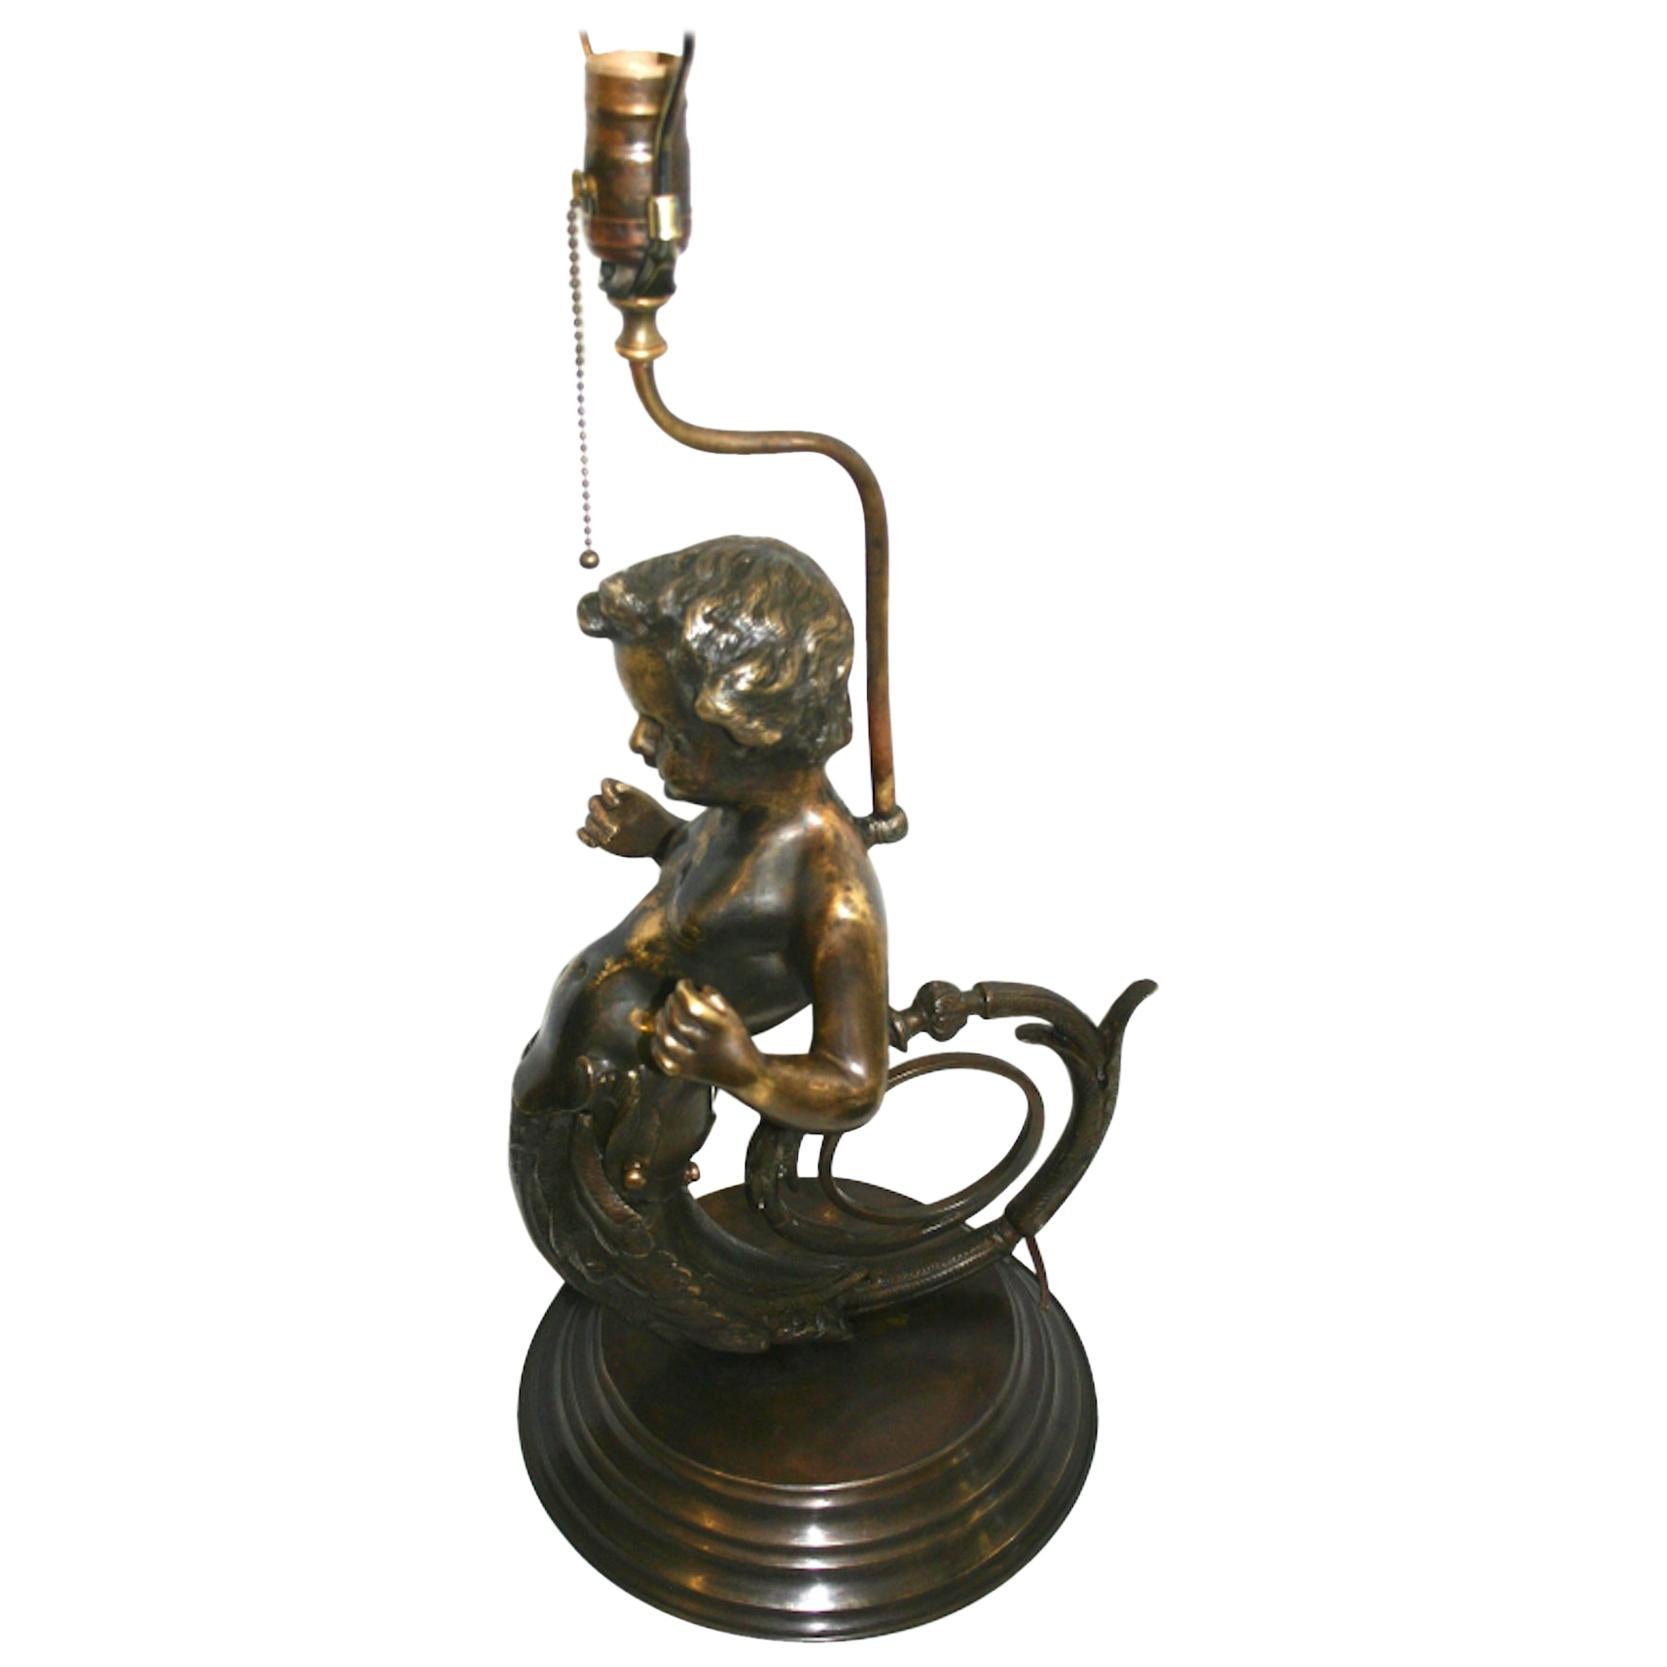 Pair of circa 1930's French patinated bronze lamps with shape of a putti.

Measurements:
Height of body 22